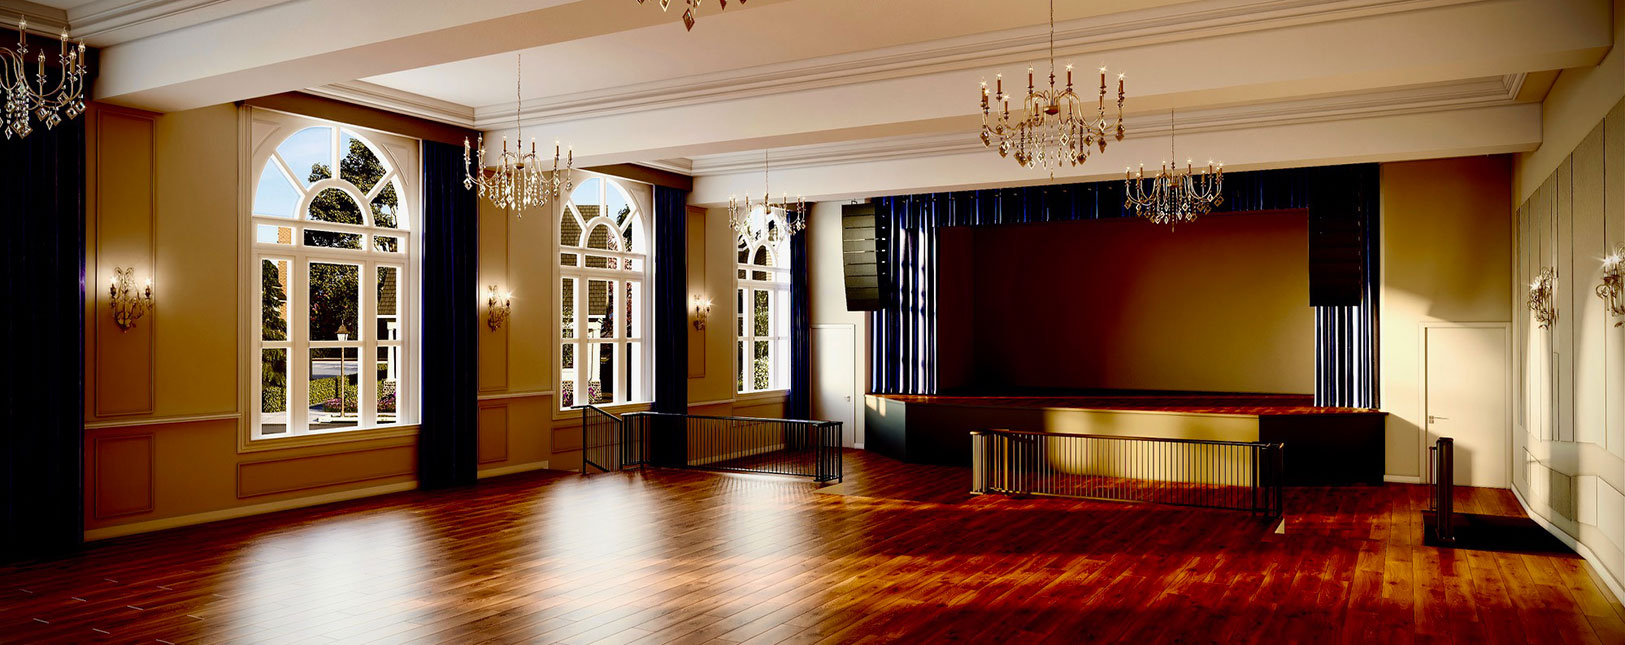 Our classic ballroom- here for you to dance the night away with friends, loved ones, or coworkers.